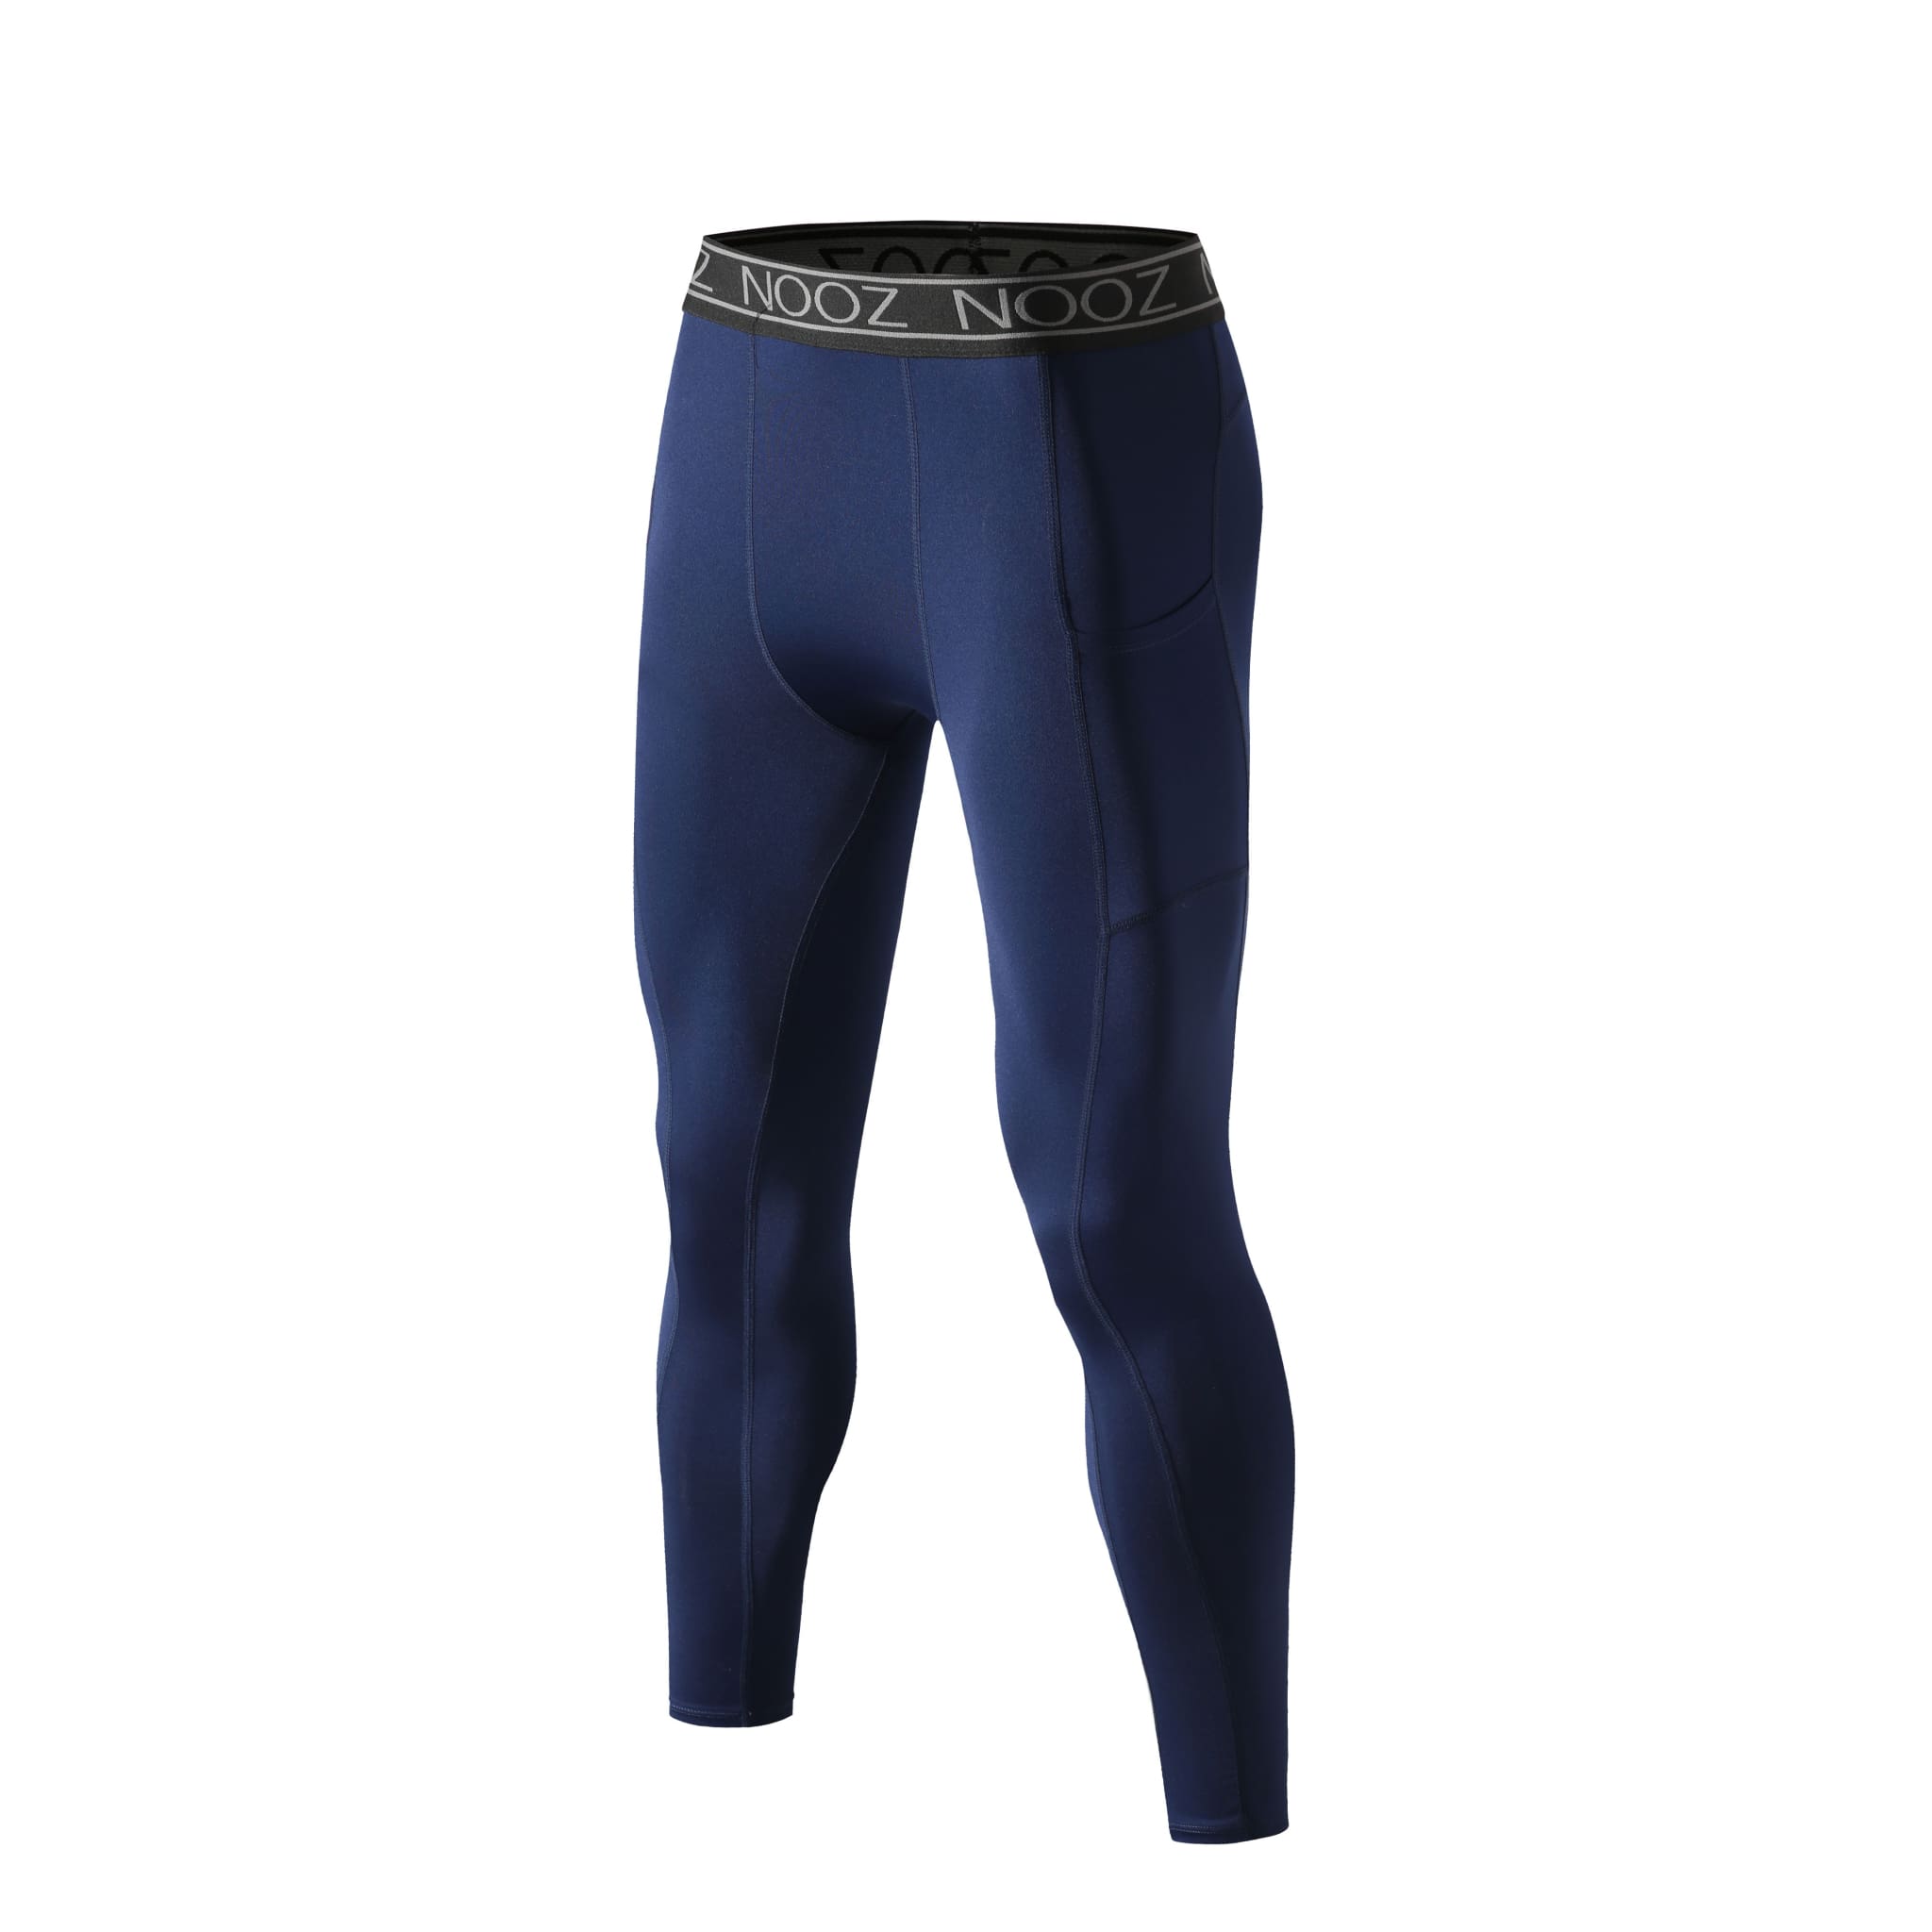 HUAKANG Men's 2 Pack Compression Pants with Pockets Cool Dry Base